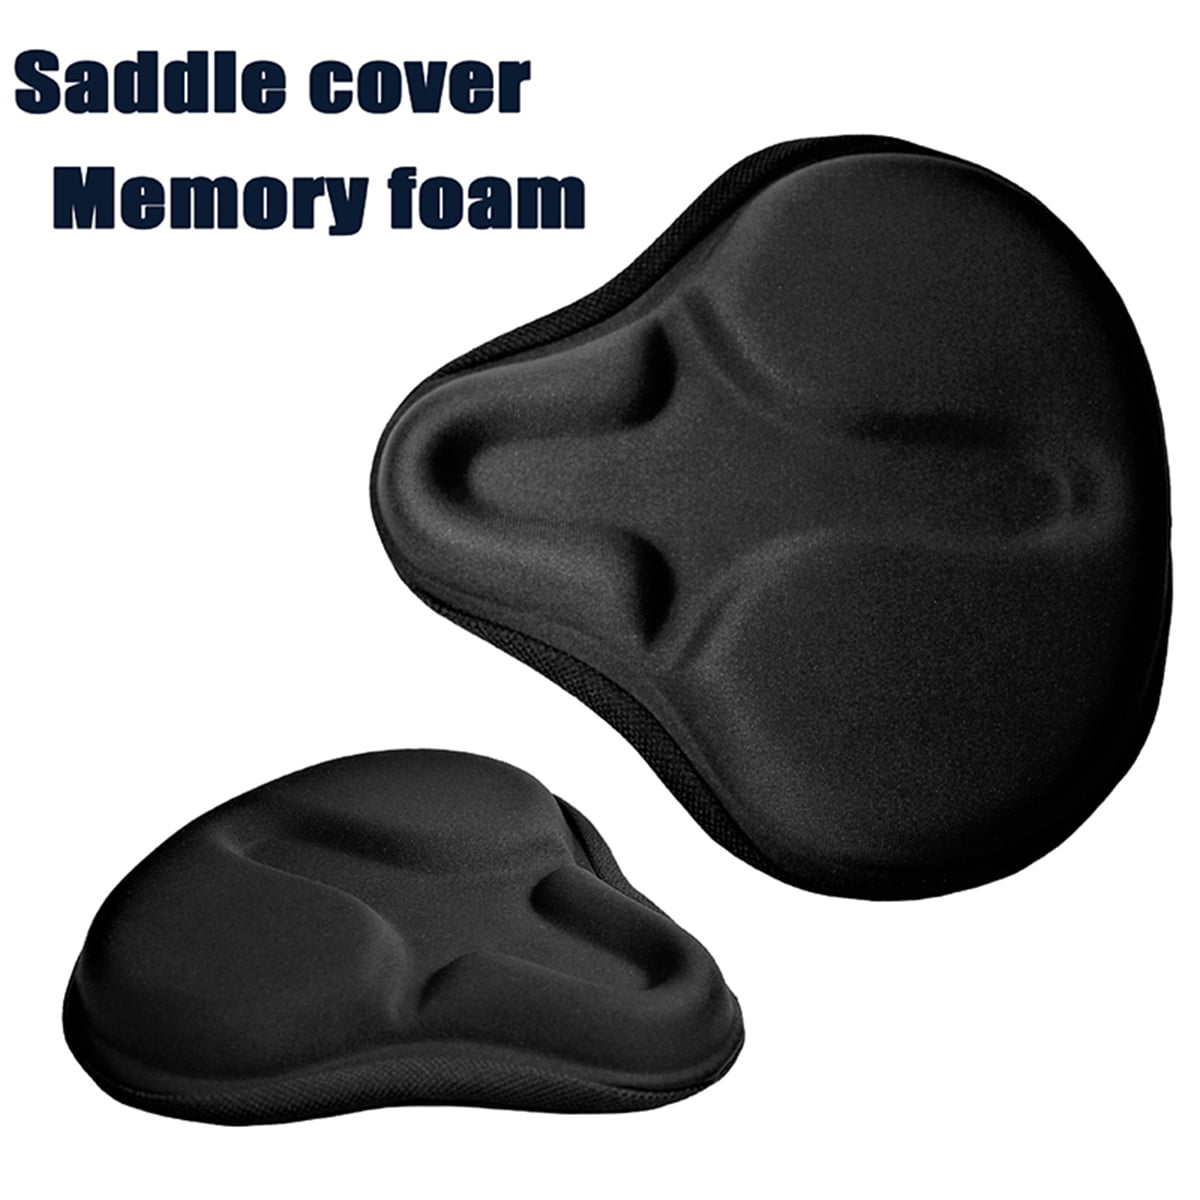 Extra Large Bicycle Seat Cover with Water Dust Resistant Cover Shock Absorbing with Reflective Strip for MTB Yosky Wide Gel Bike Seat Cover - Spinning Bikes 11 inches x 11 inches